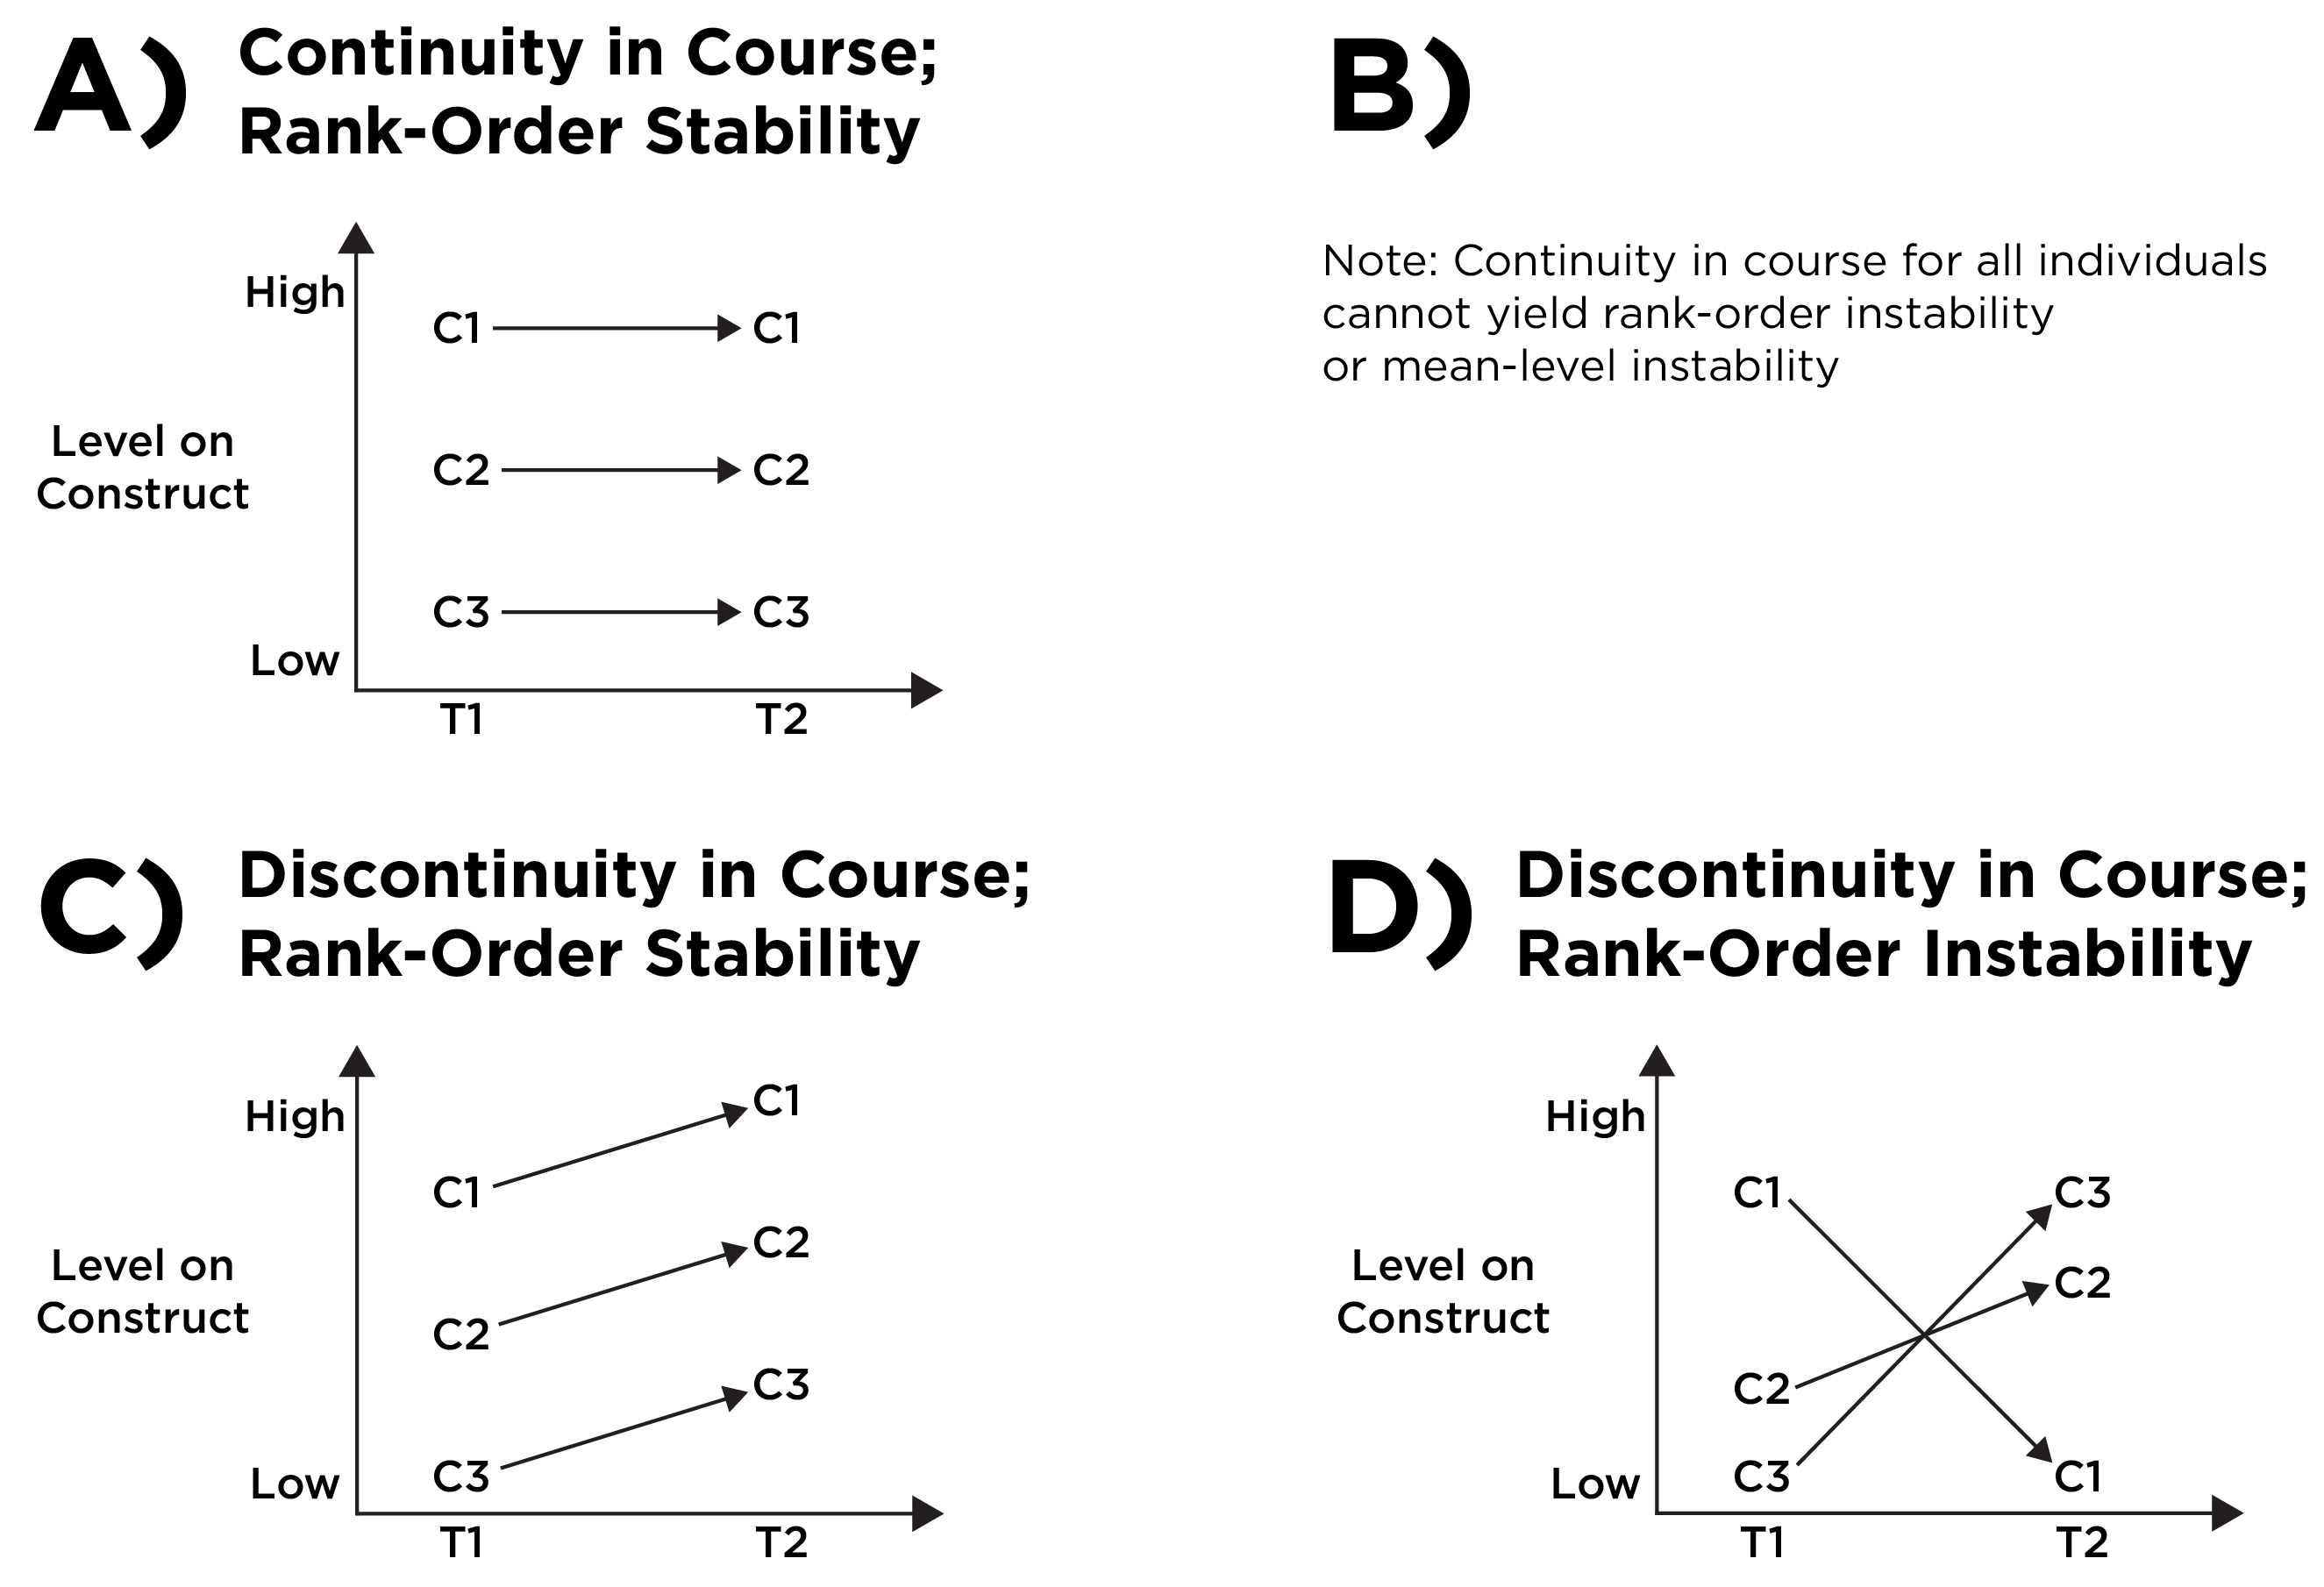 Continuity in Course Versus Rank-Order Stability. C1, C2, and C3 are three individual children assessed at two timepoints: T1 and T2. Continuity in course is sometimes called “stability in level.” (Figure reprinted from Petersen (in press), Figure 2, Petersen, I. T. (in press). Reexamining developmental continuity and discontinuity in the 21st century: Better aligning behaviors, functions, and mechanisms. Developmental Psychology. https://doi.org/10.1037/dev0001657 Copyright (c) American Psychological Association. Used with permission.)